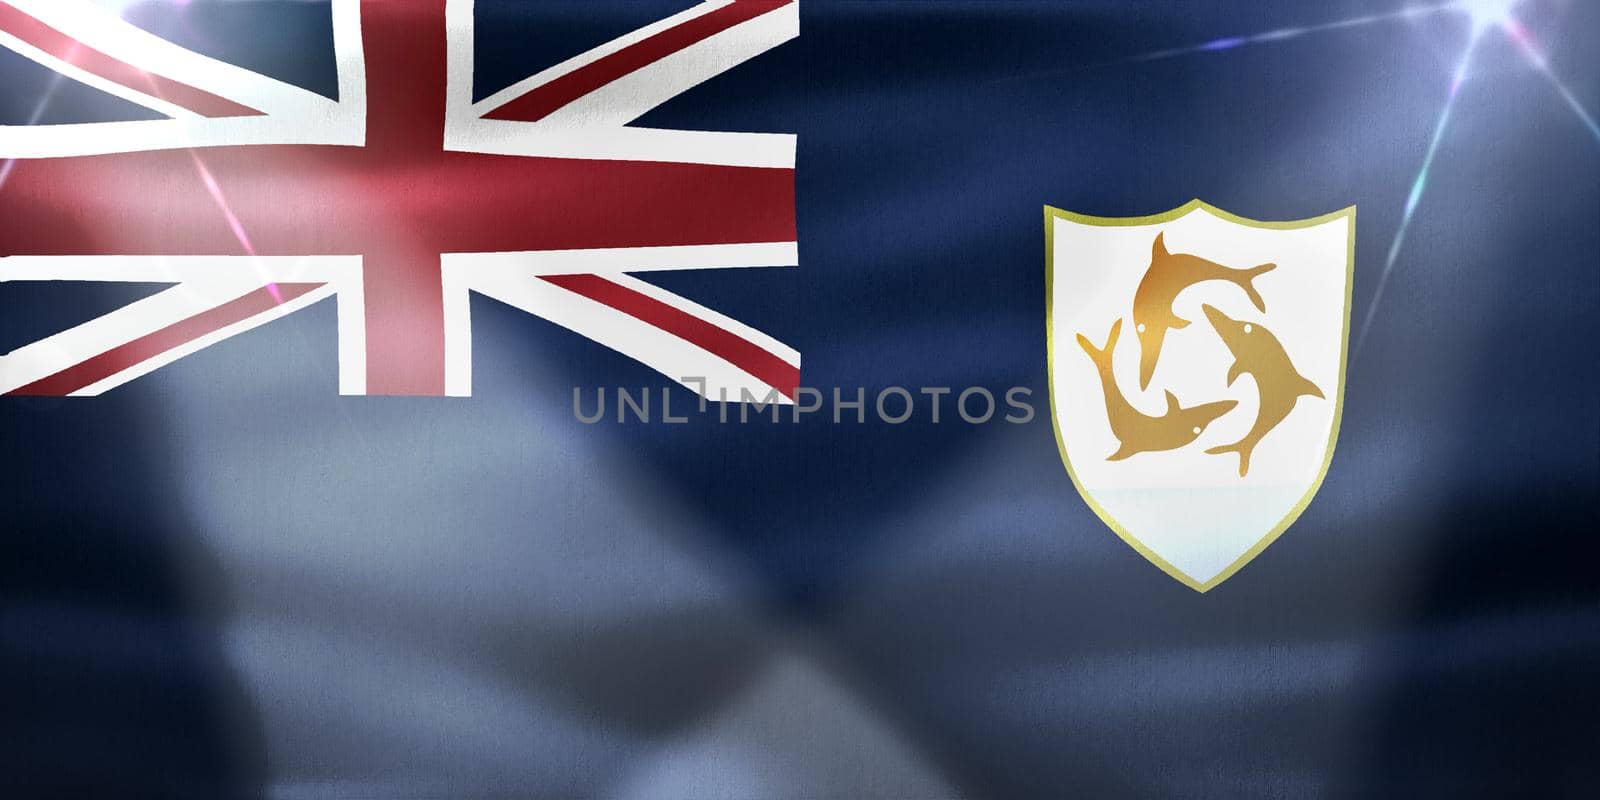 Anguilla flag - realistic waving fabric flag by MP_foto71